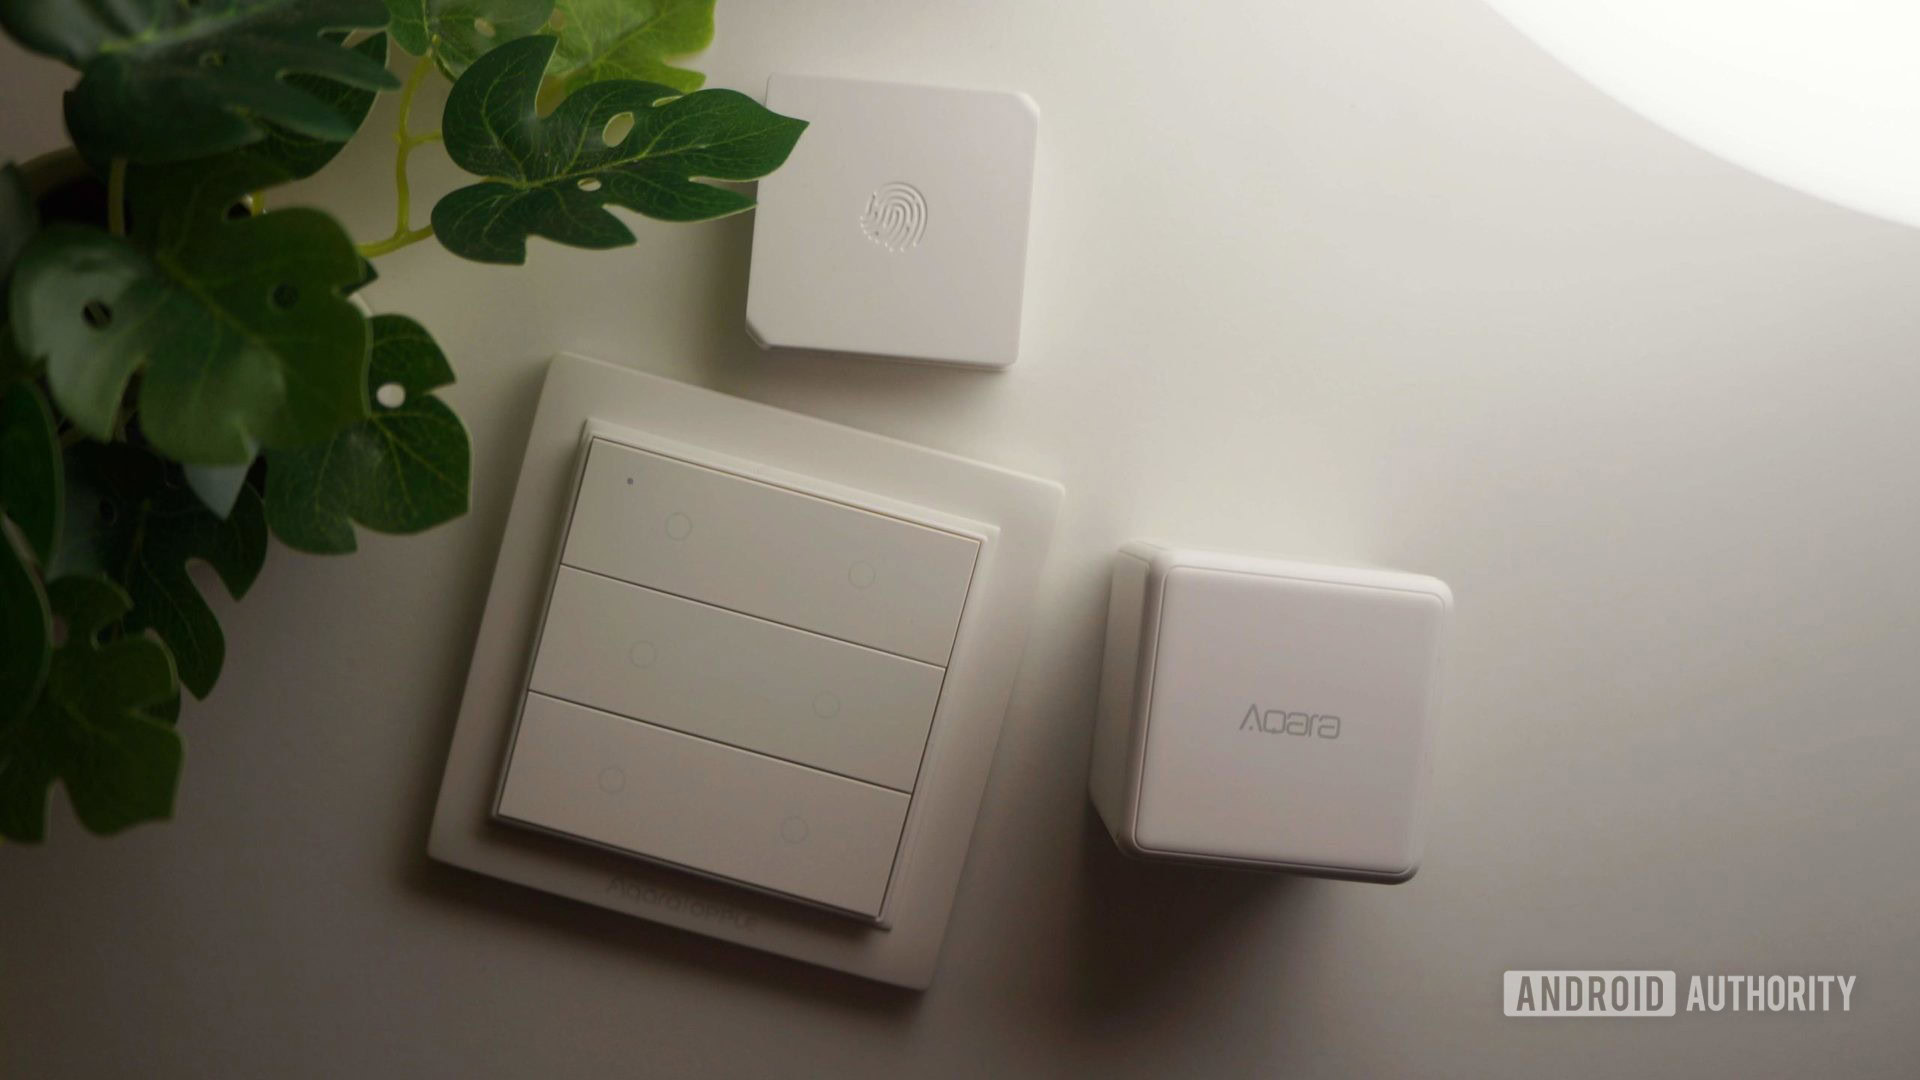 Should you consider investing in Xiaomi smart home tech?